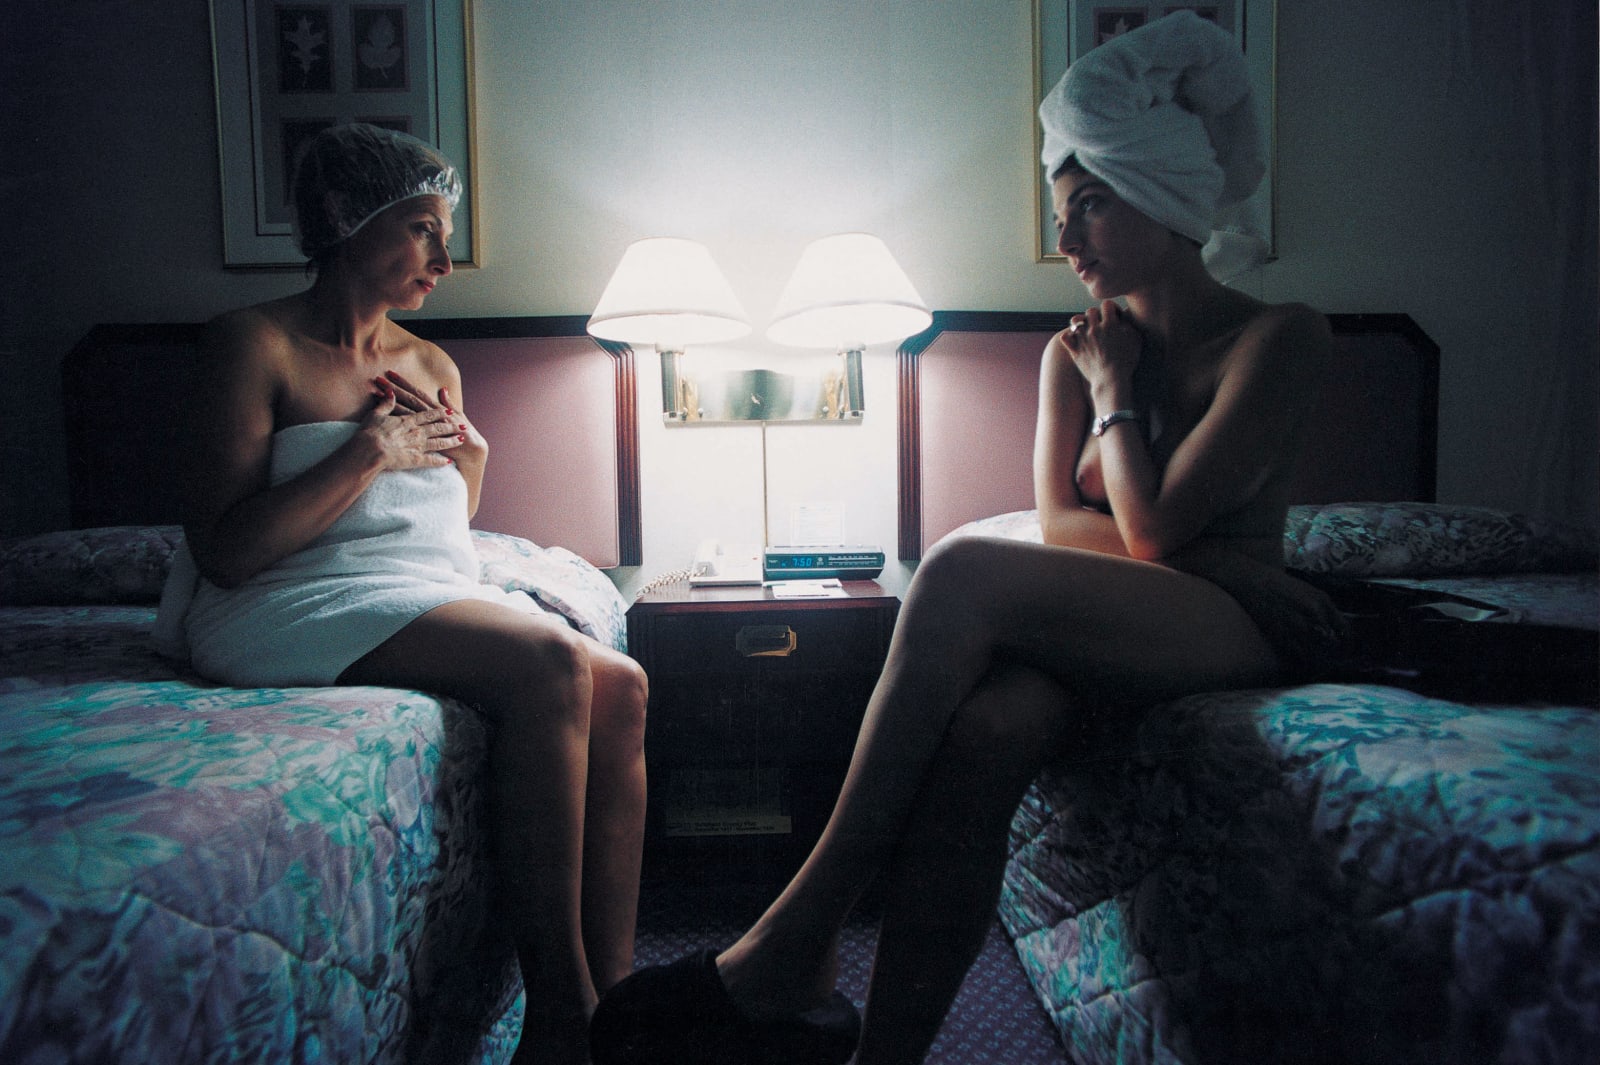 Elinor Carucci My Mother and I in a Hotel Room mother in shower cap and towel seated on bed next to bed where nude artist sits with hair in towel